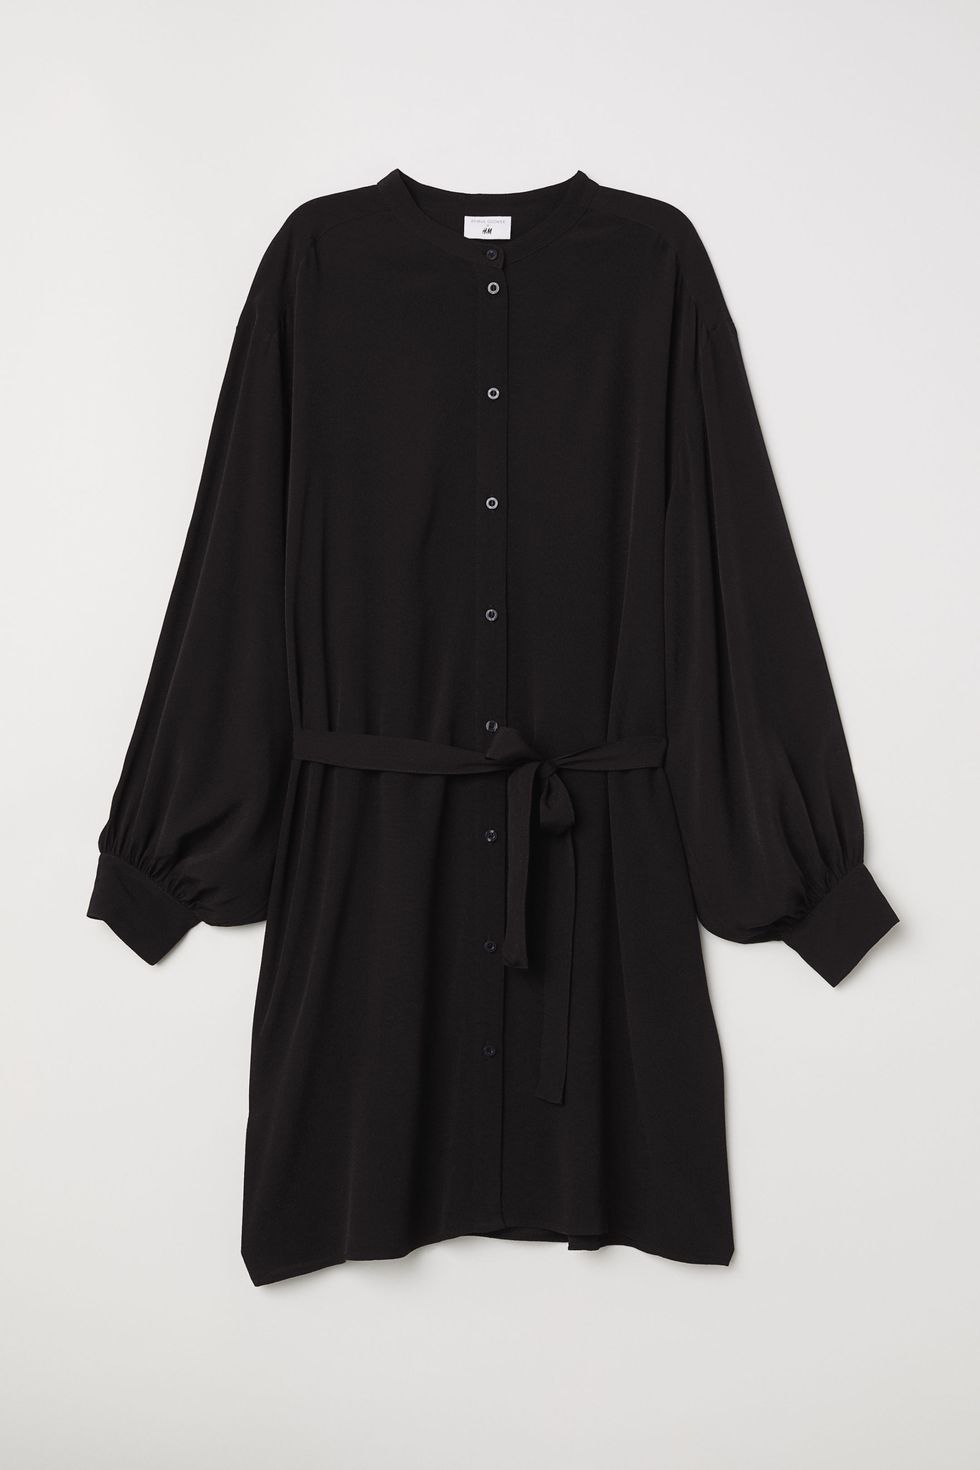 Clothing, Black, Sleeve, Outerwear, Blouse, Robe, Costume, Top, 